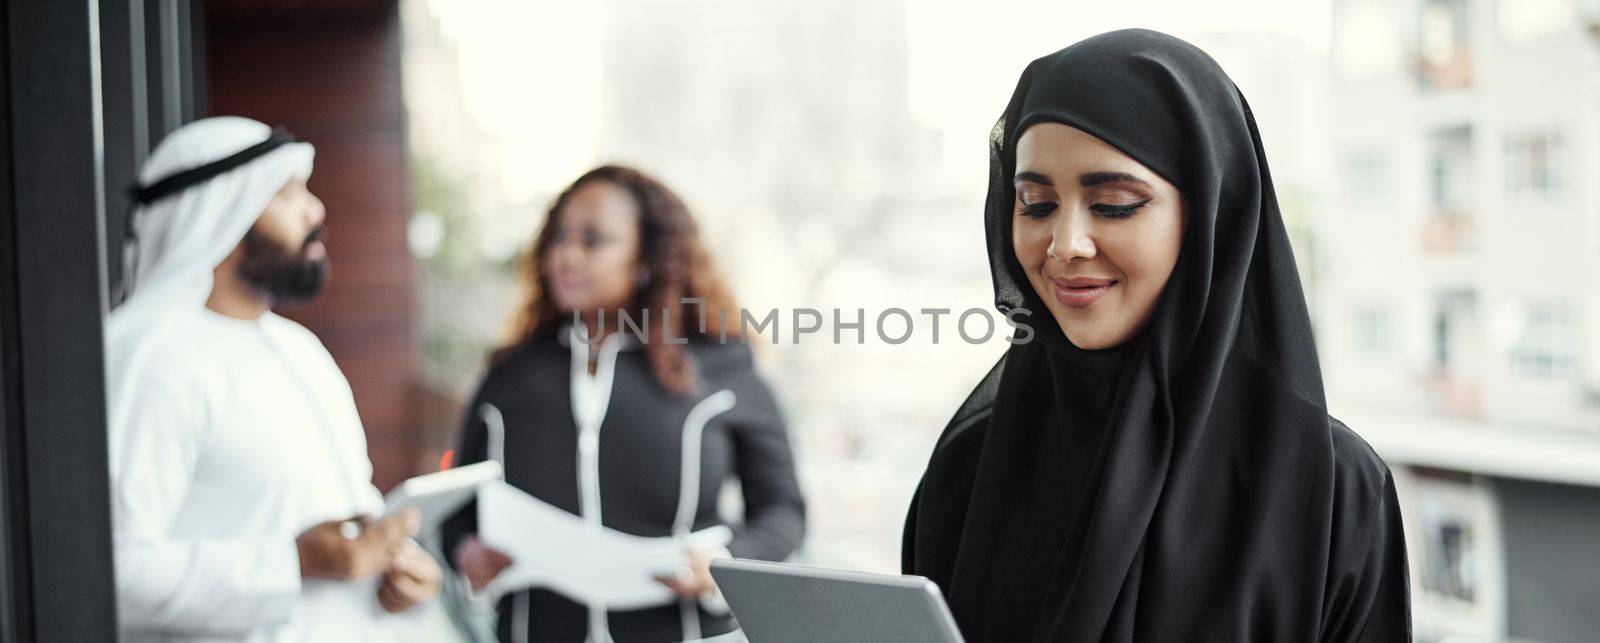 Shes happy with her progress. an attractive young businesswoman dressed in Islamic traditional clothing using a tablet on her office balcony